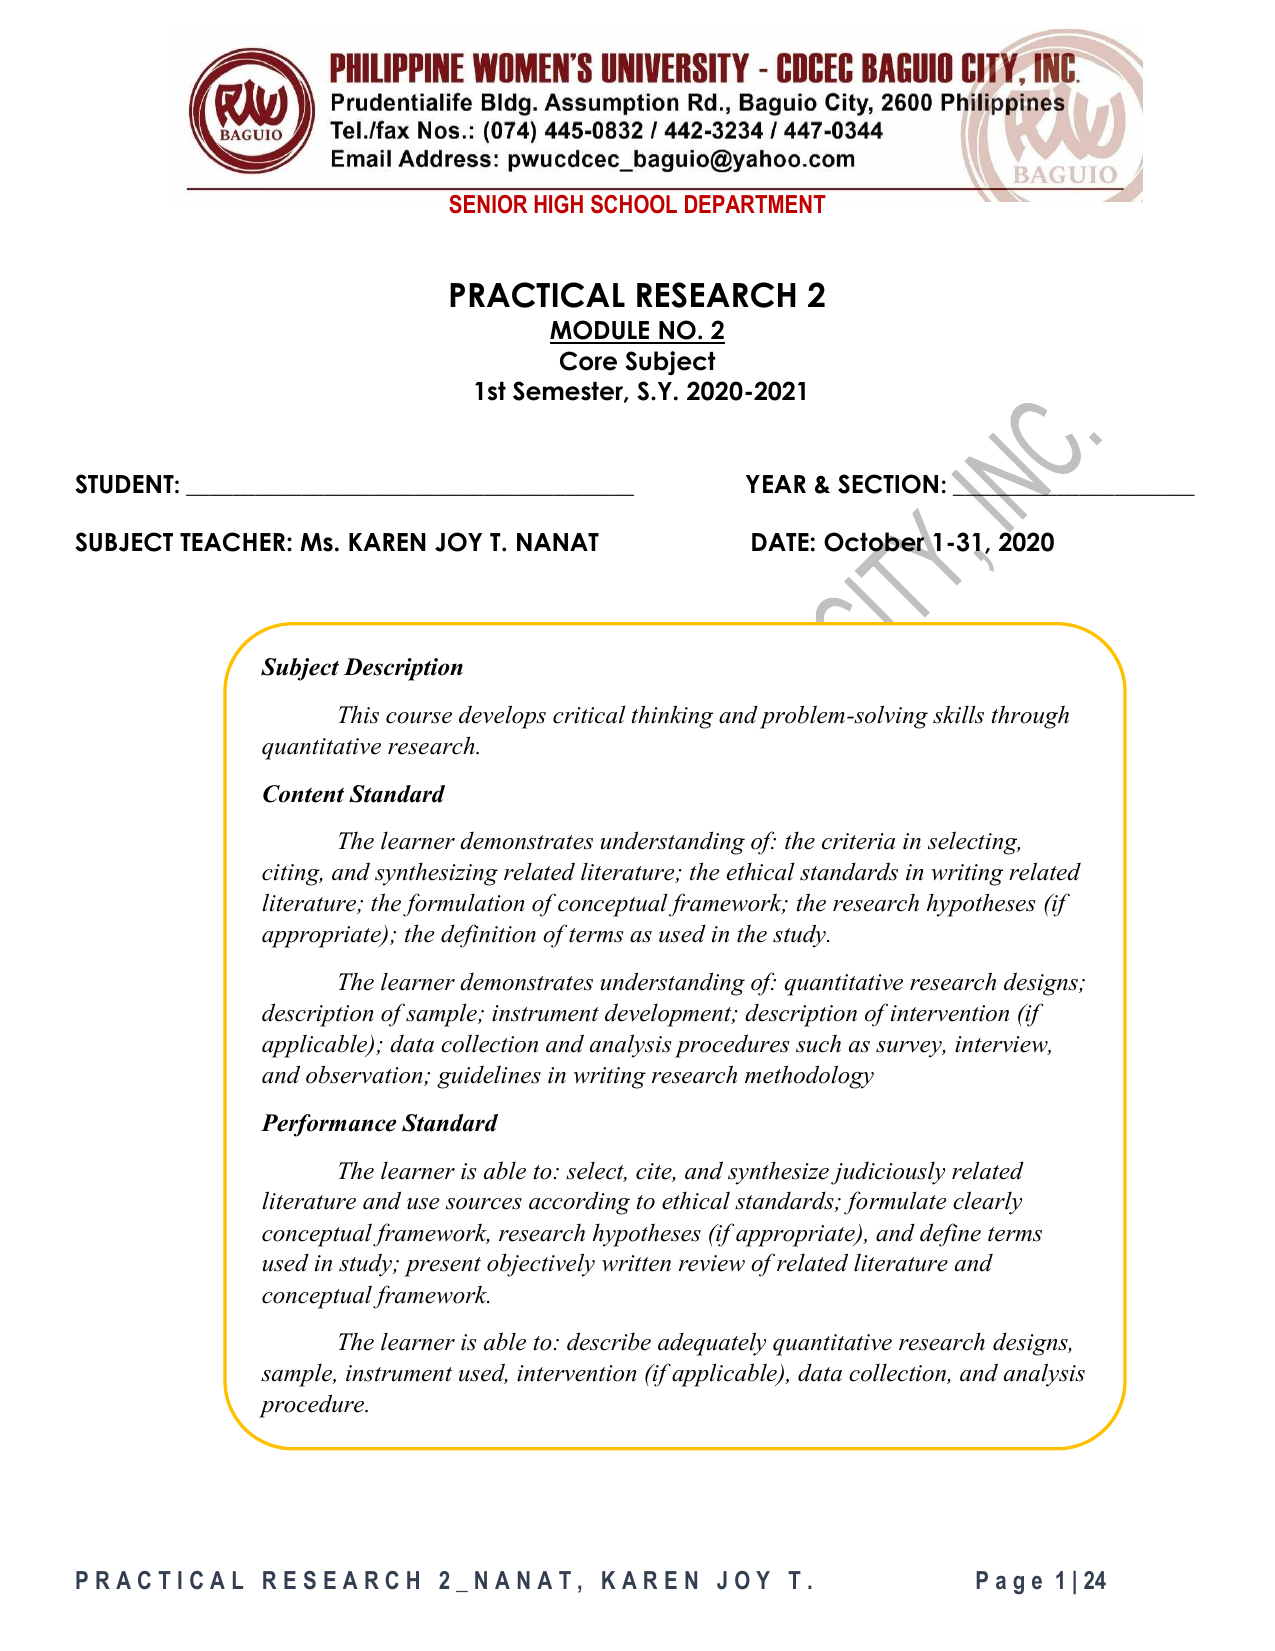 abstract in practical research 2